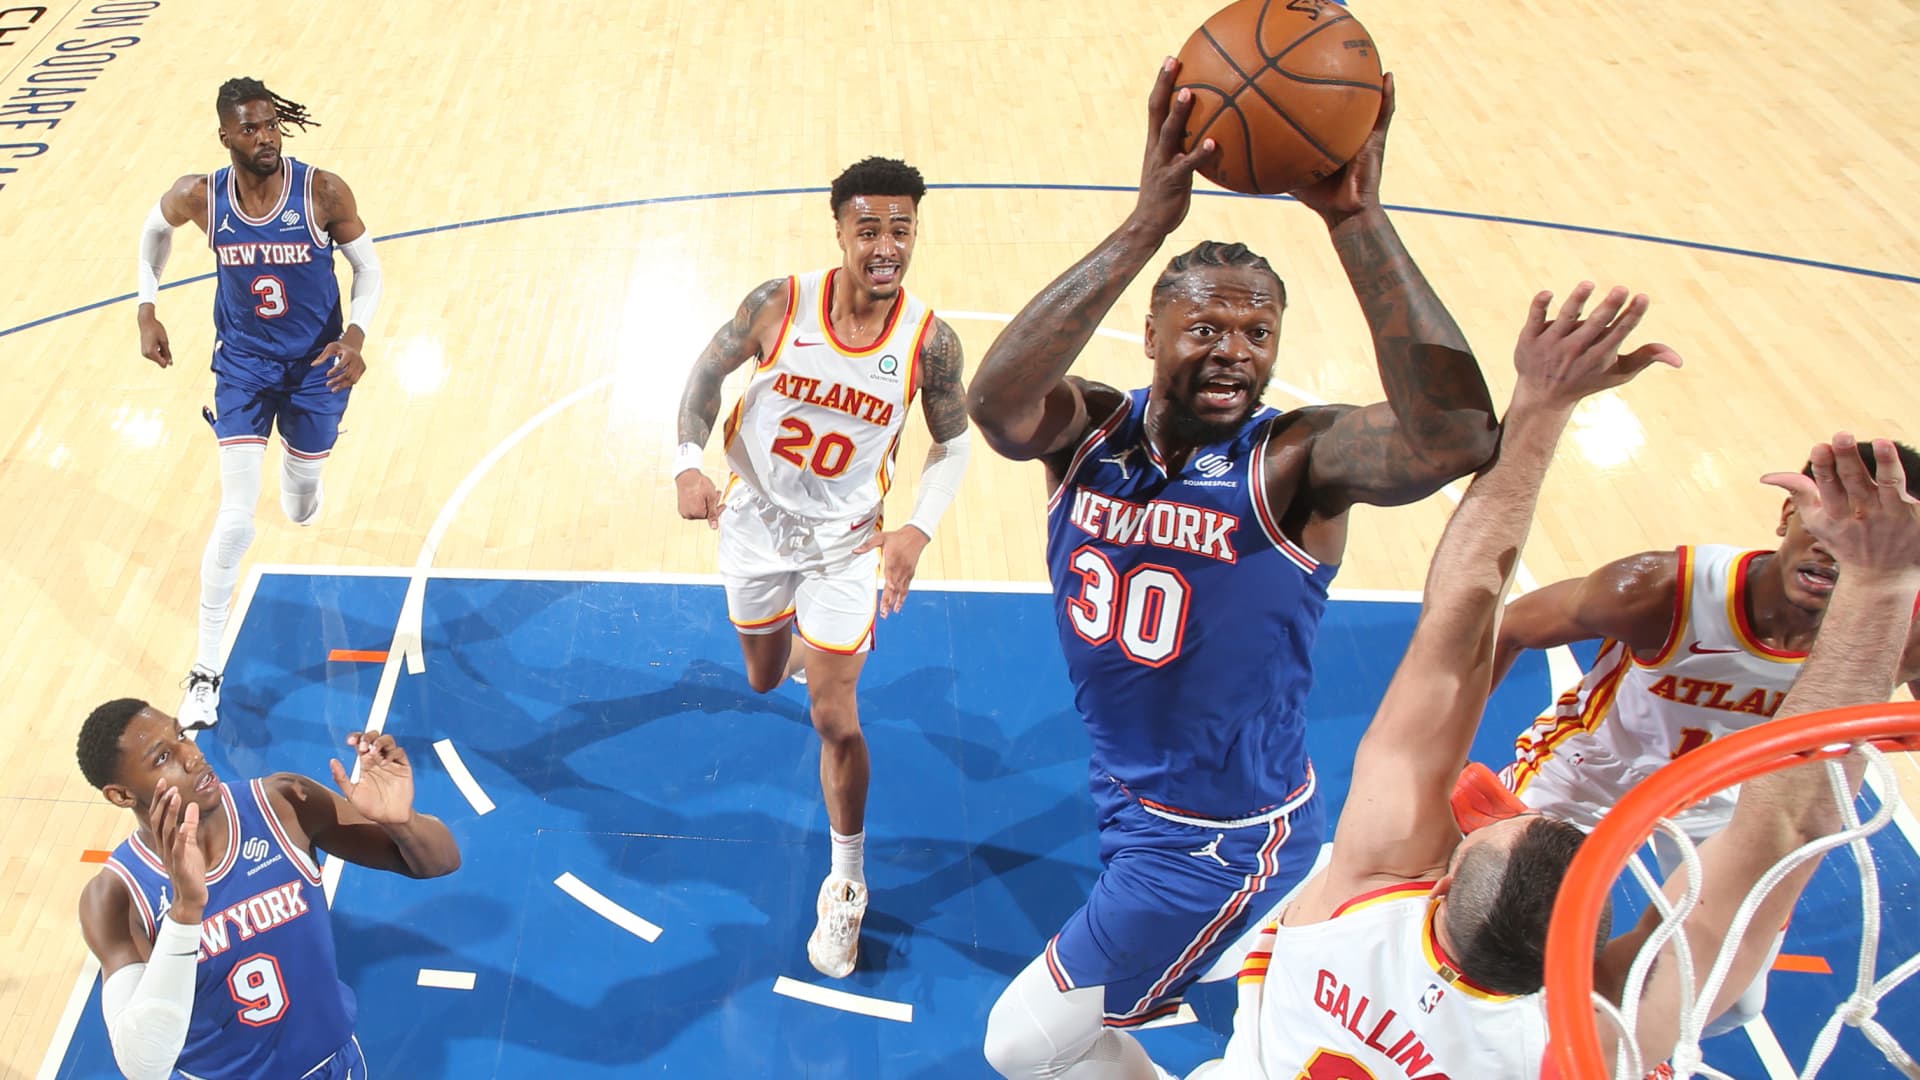 Julius Randle #30 of the New York Knicks drives to the basket against the Atlanta Hawks during Round 1, Game 5 of the 2021 NBA Playoffs on June 2, 2021 at Madison Square Garden in New York City, New York.